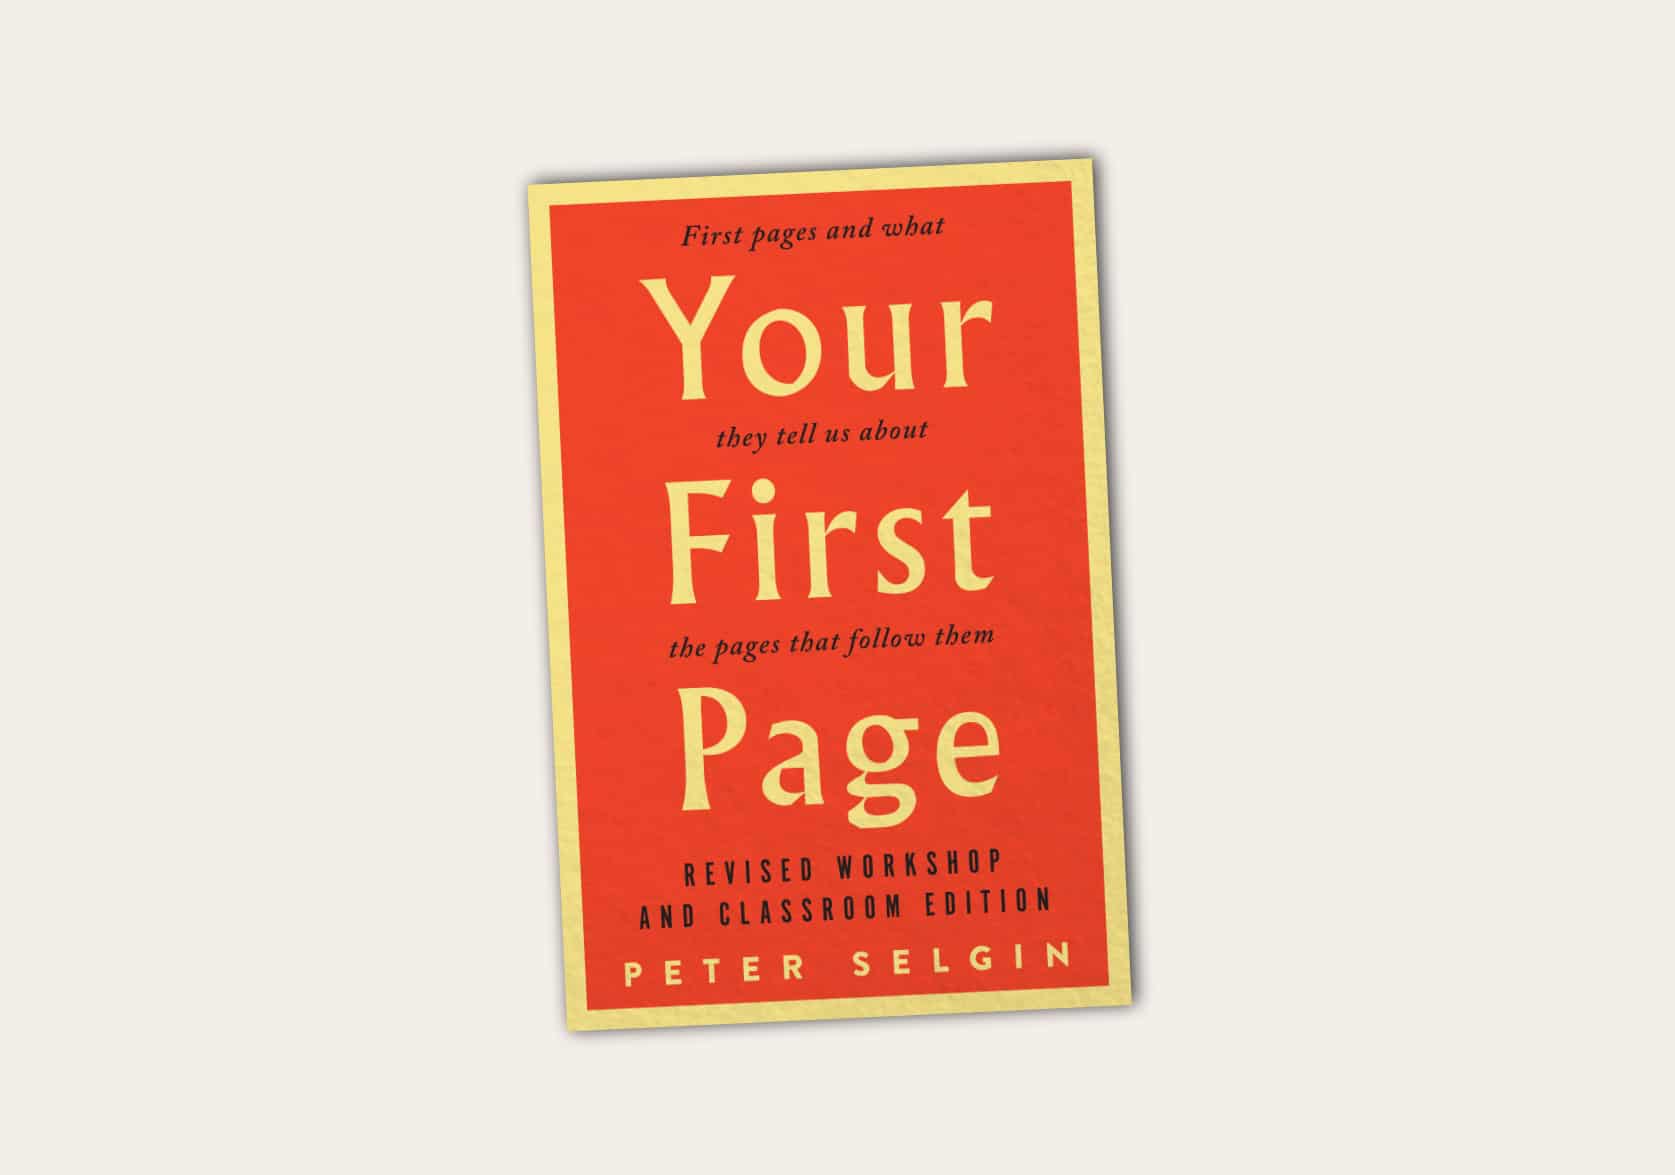 Your First Page: First pages and what they tell us about the pages that follow them by Peter Selgin. Revised workshop and classroom edition.